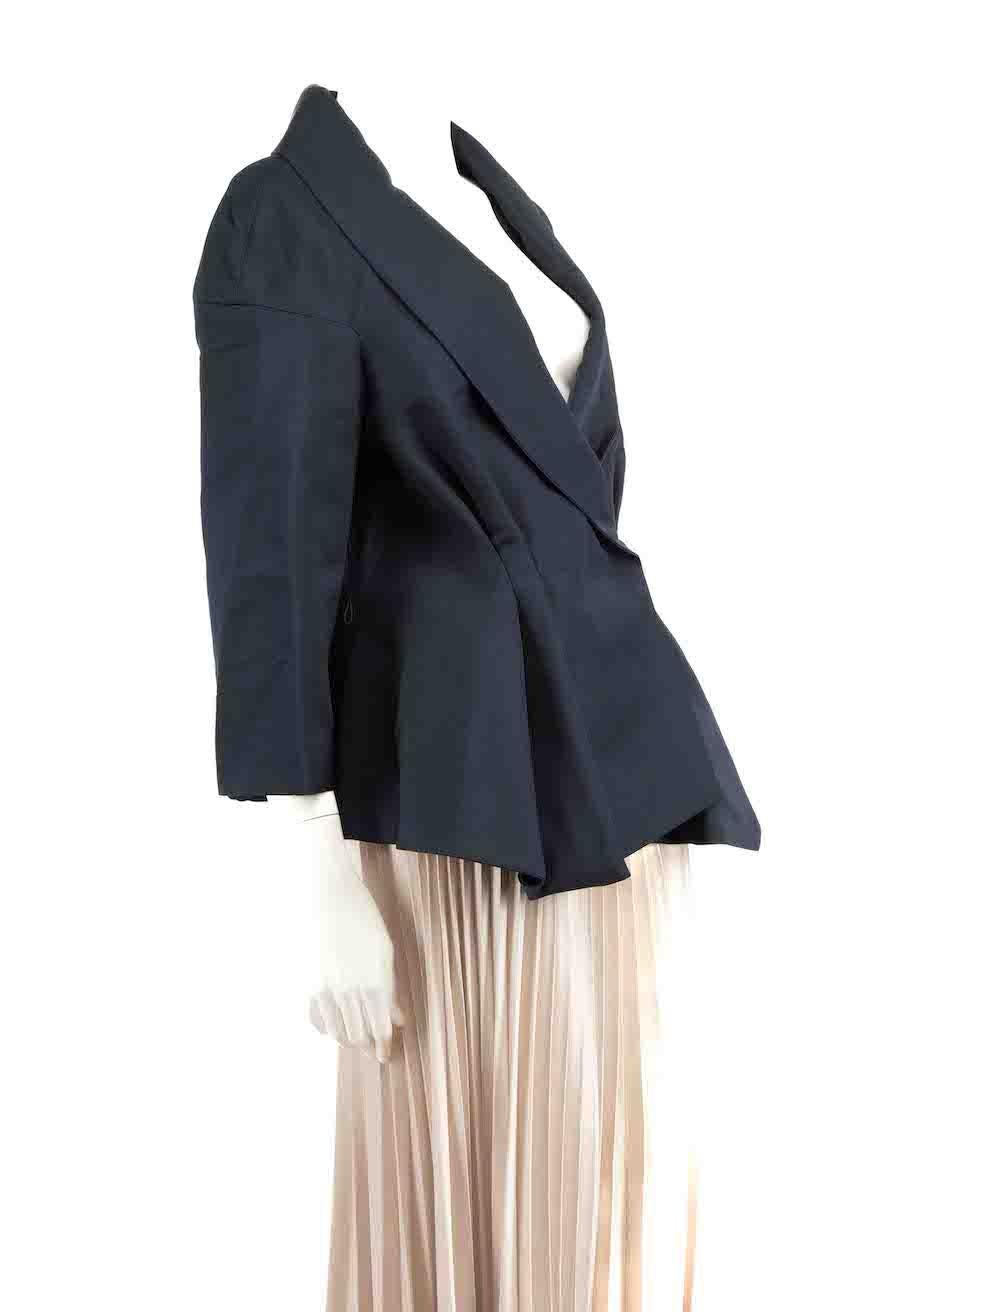 CONDITION is Very good. Minimal wear to jacket is evident. Minimal wear with belt and composition label missing on this used Carolina Herrera designer resale item.
 
 
 
 Details
 
 
 Navy
 
 Synthetic
 
 Fitted jacket
 
 Double breasted with snap